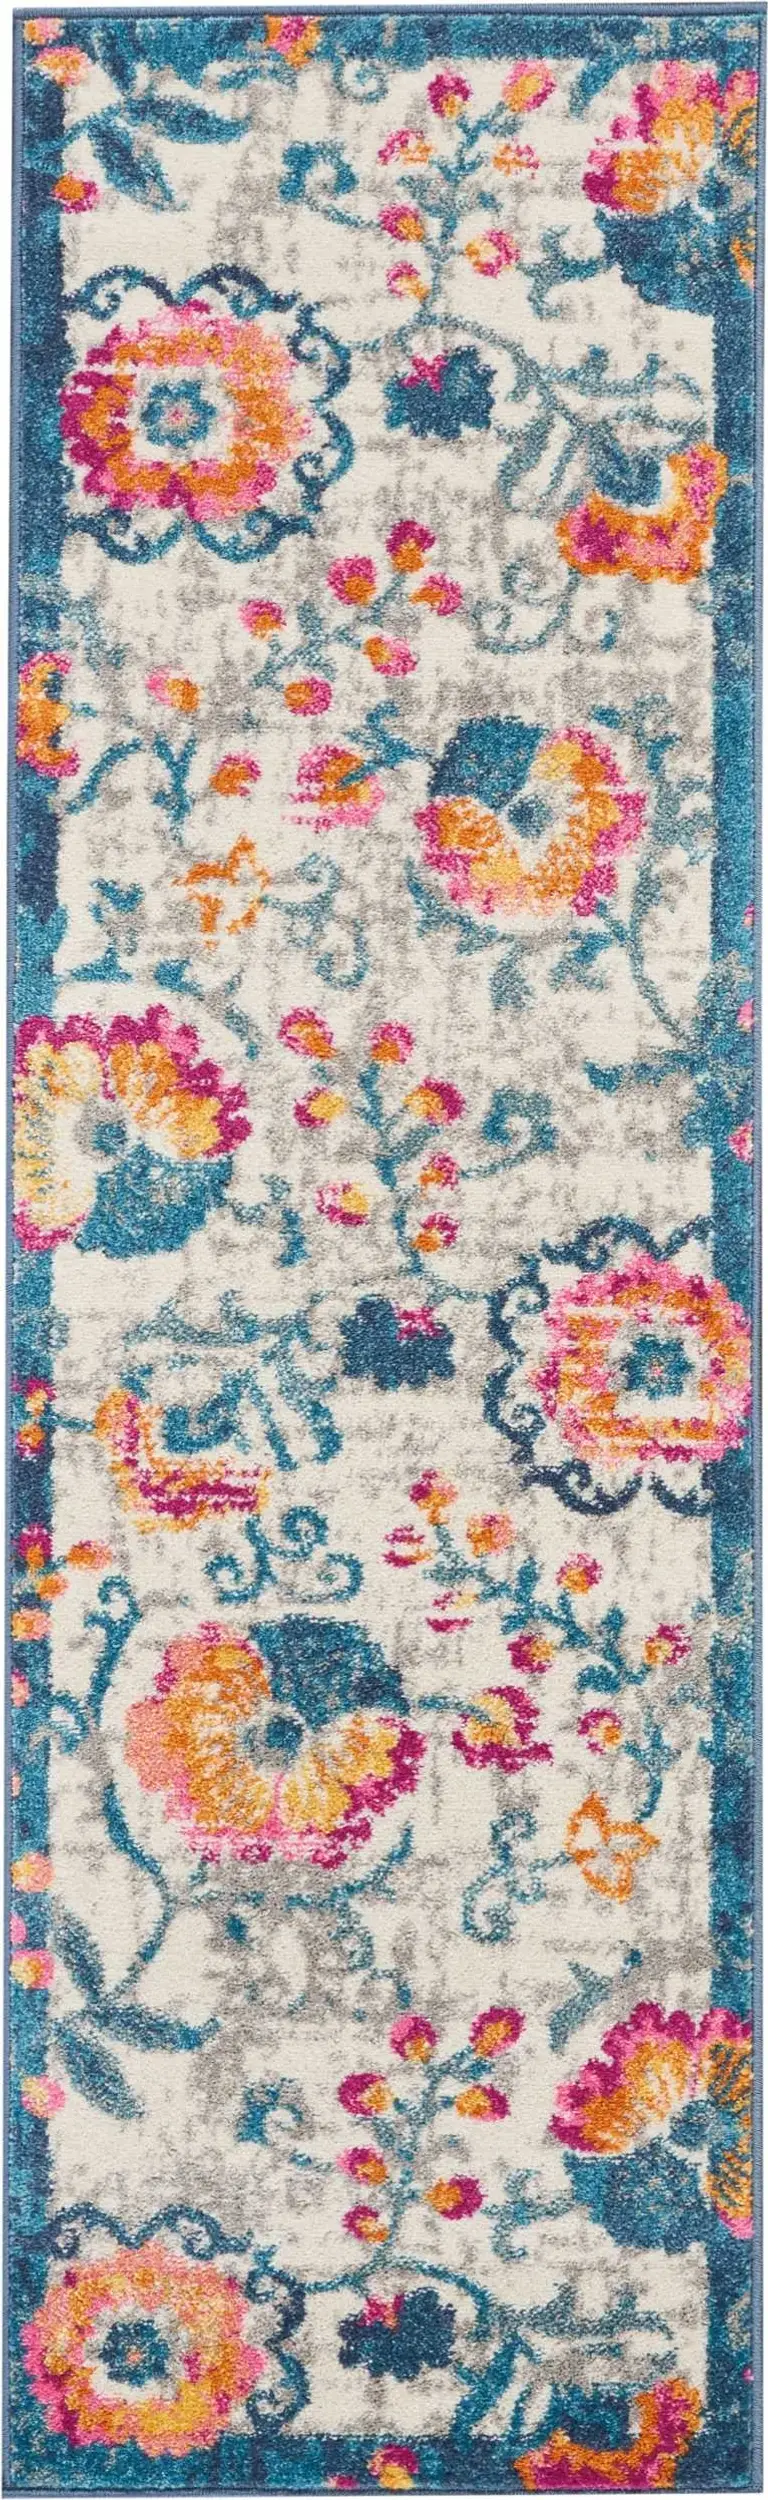 Ivory and Blue Floral Vines Runner Rug Photo 1